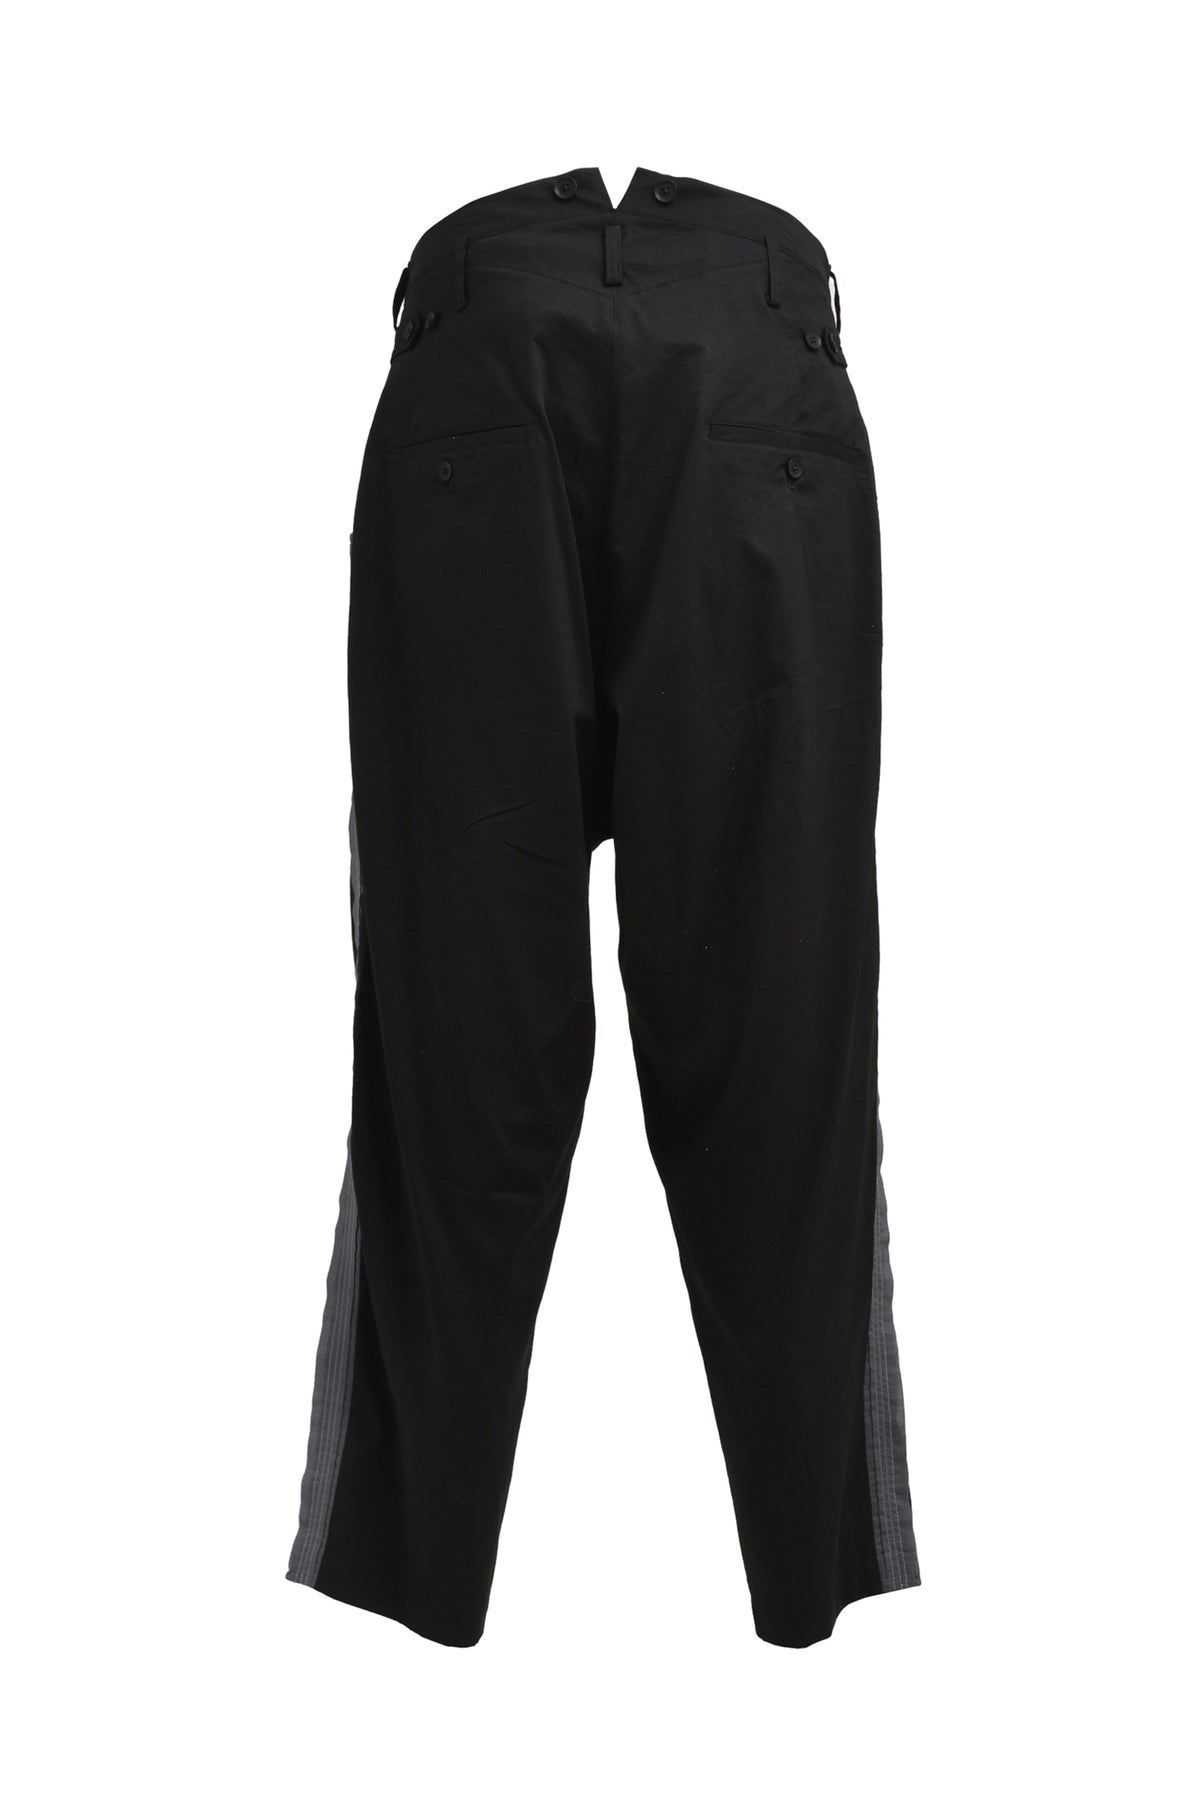 RECON STRETCH CARGO PANT [OLV GRN] 30